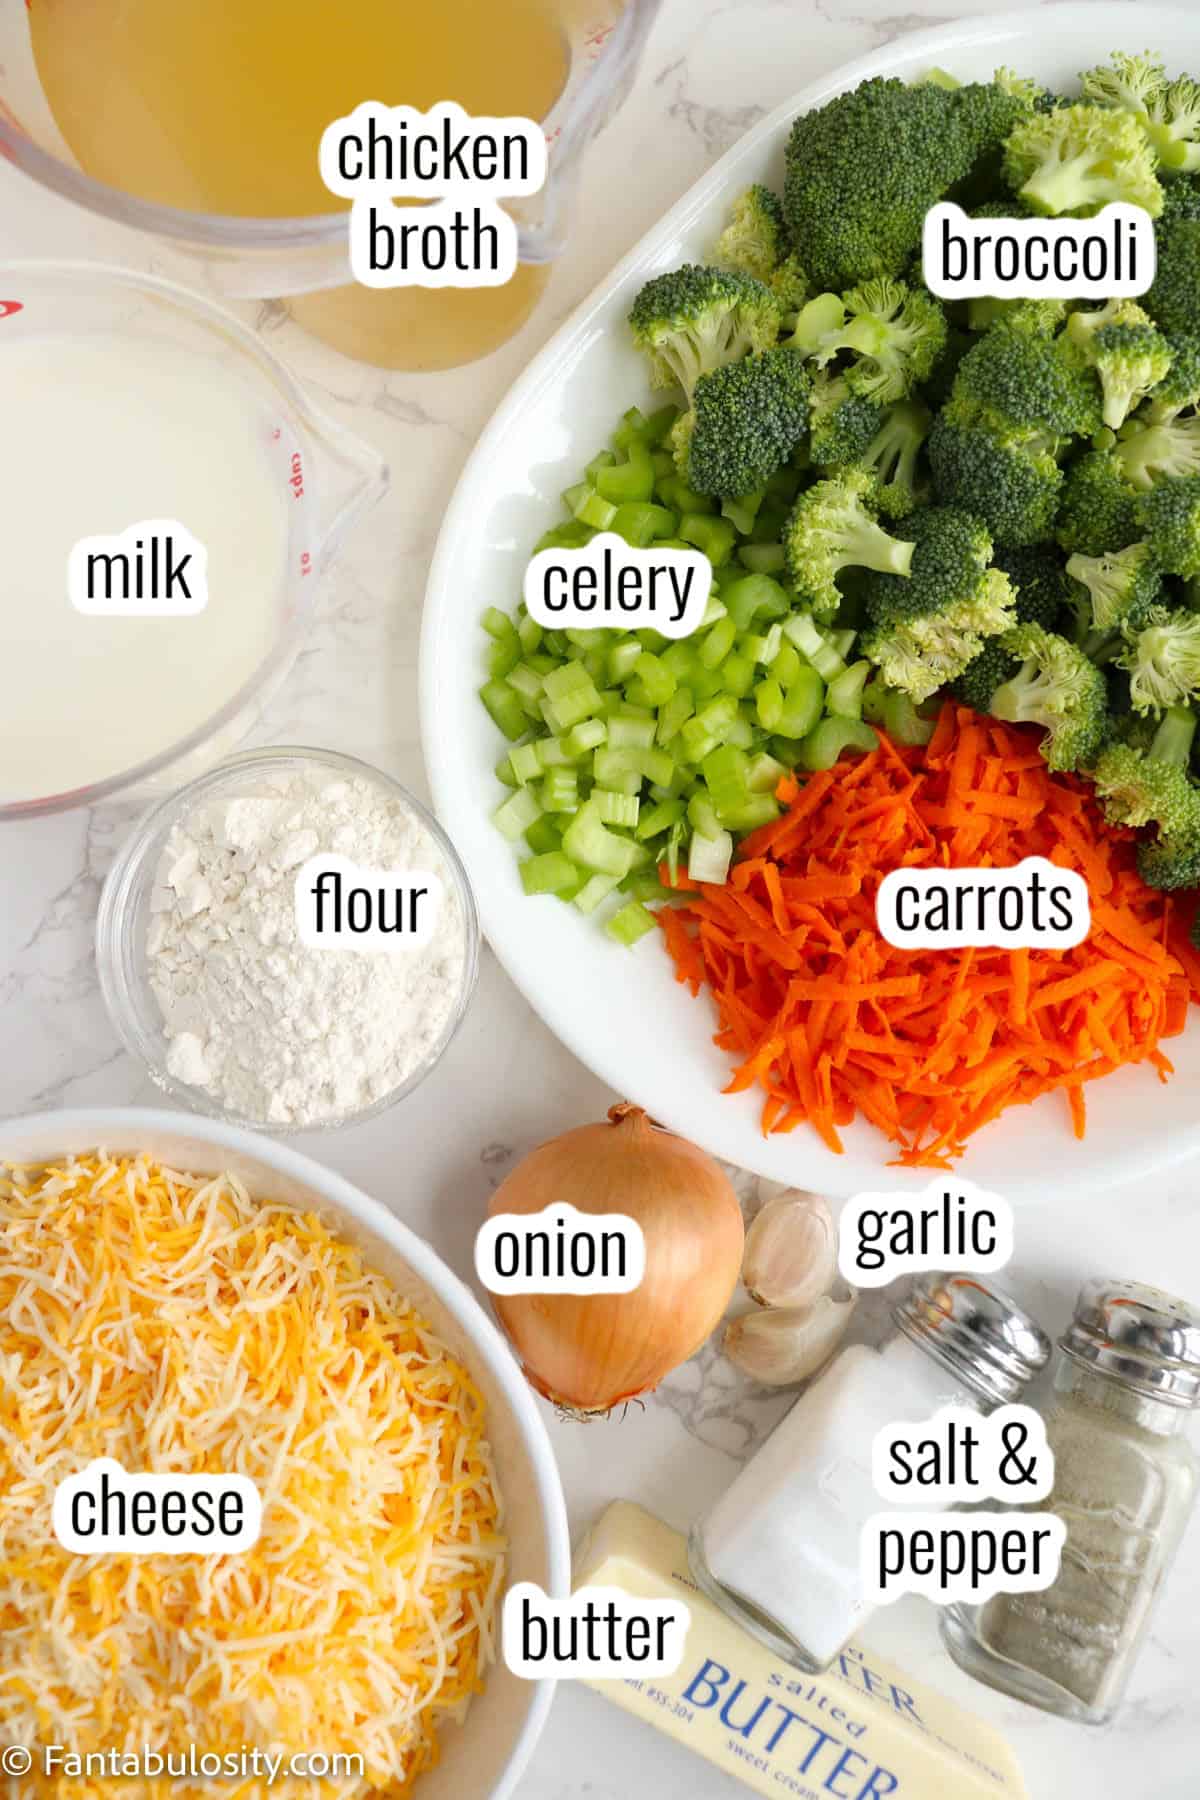 Ingredients for broccoli cheddar soup